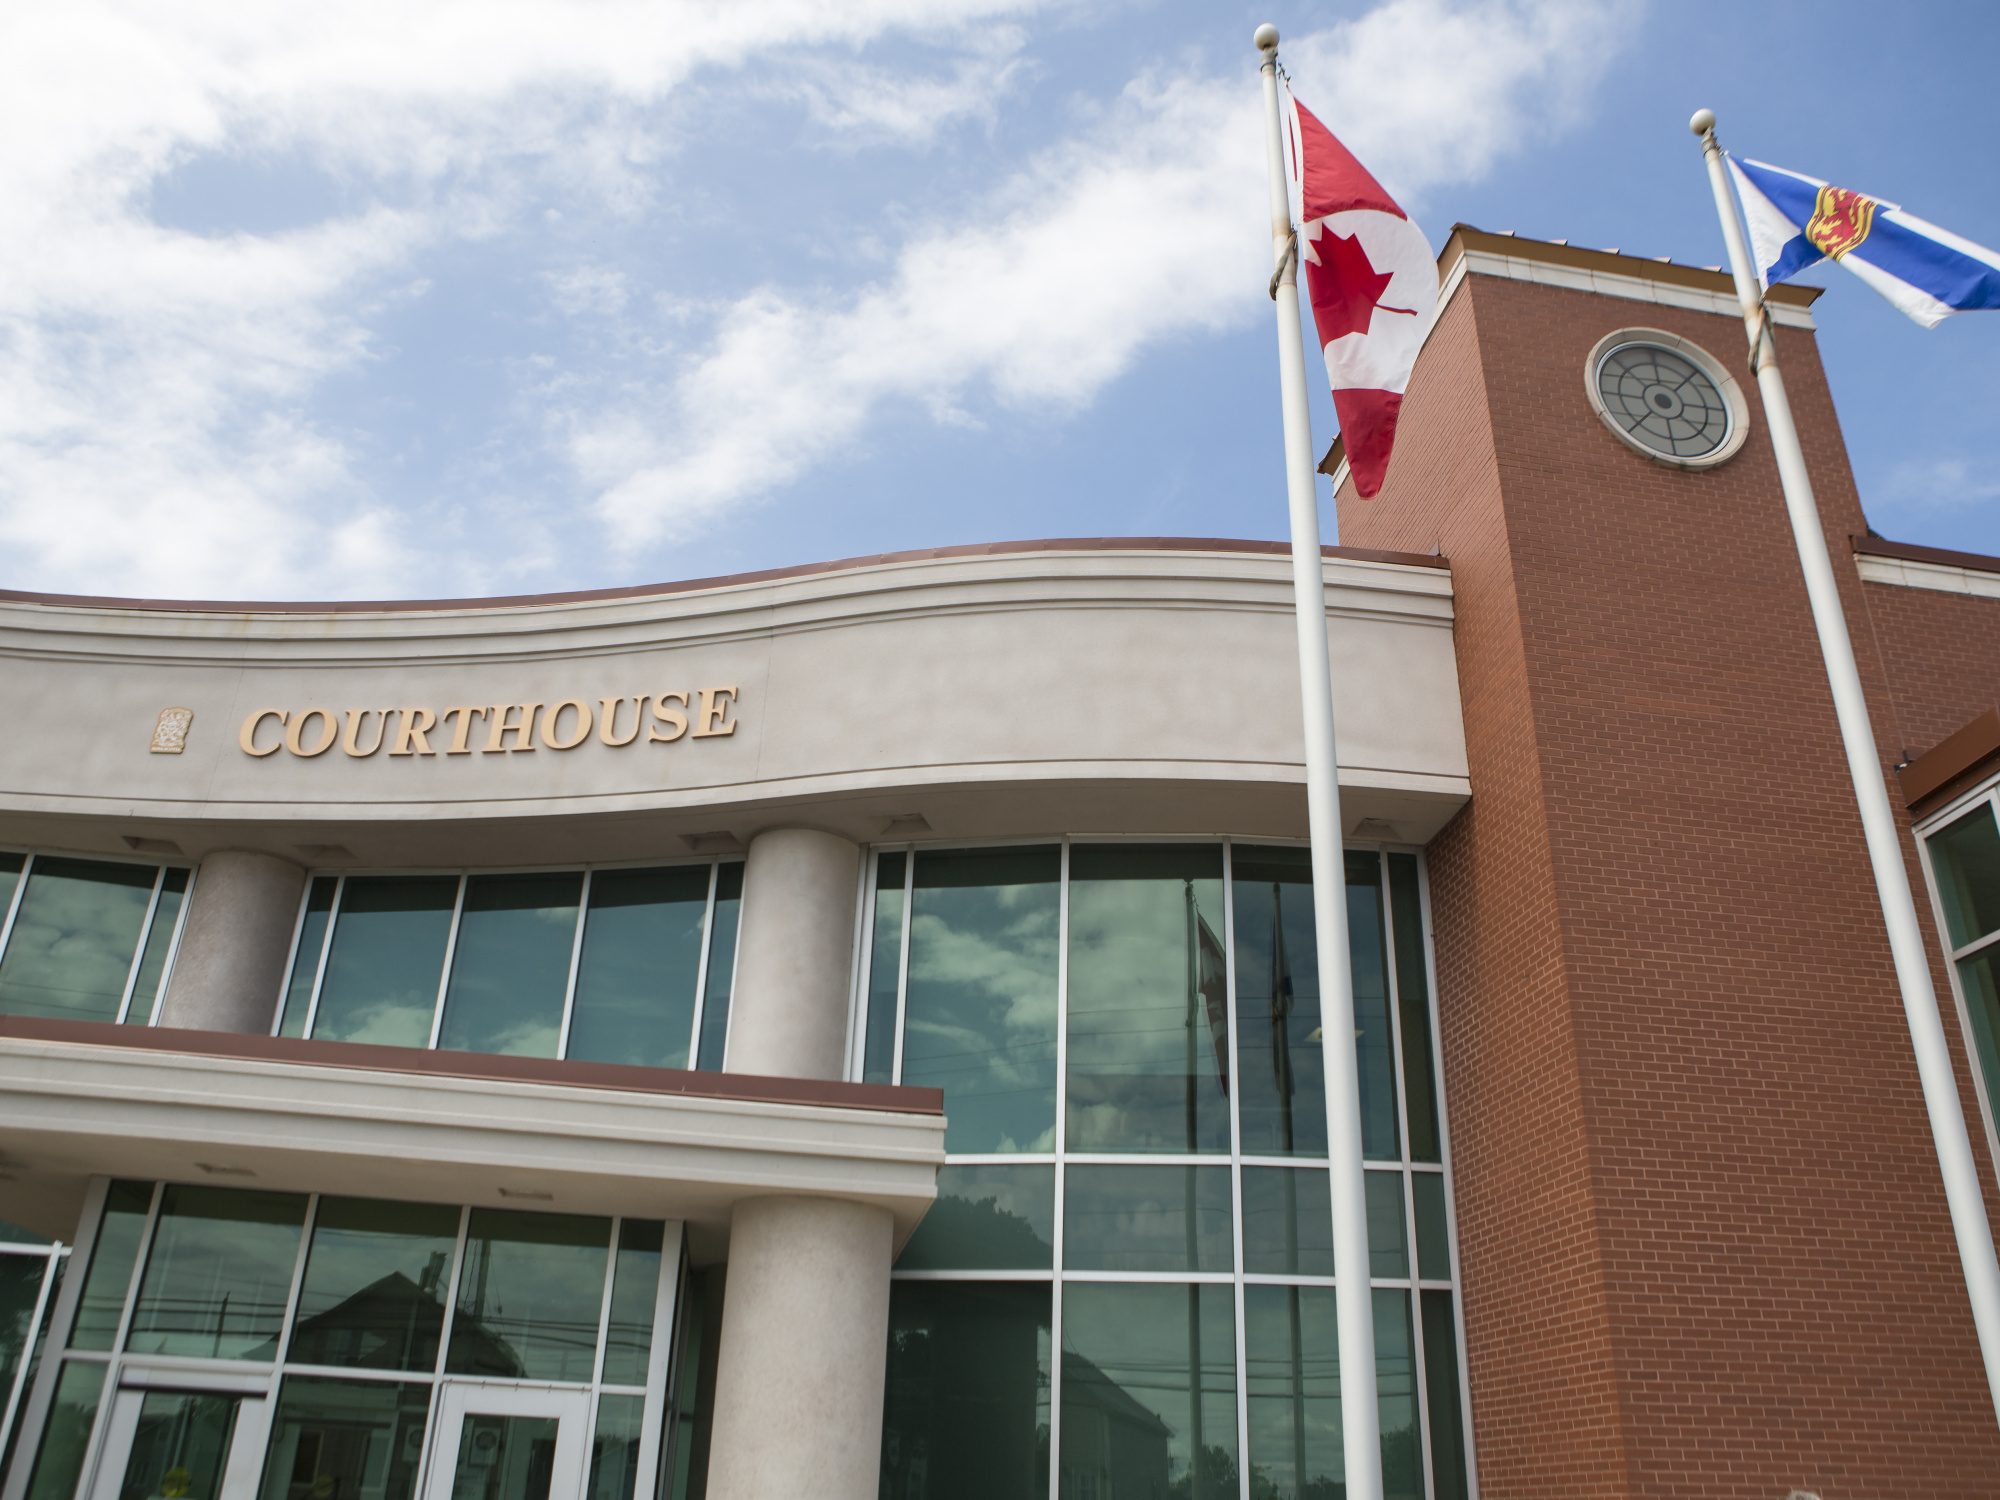 Photo showing the exterior of a Nova Scotia courthouse with a Canadian flag flying